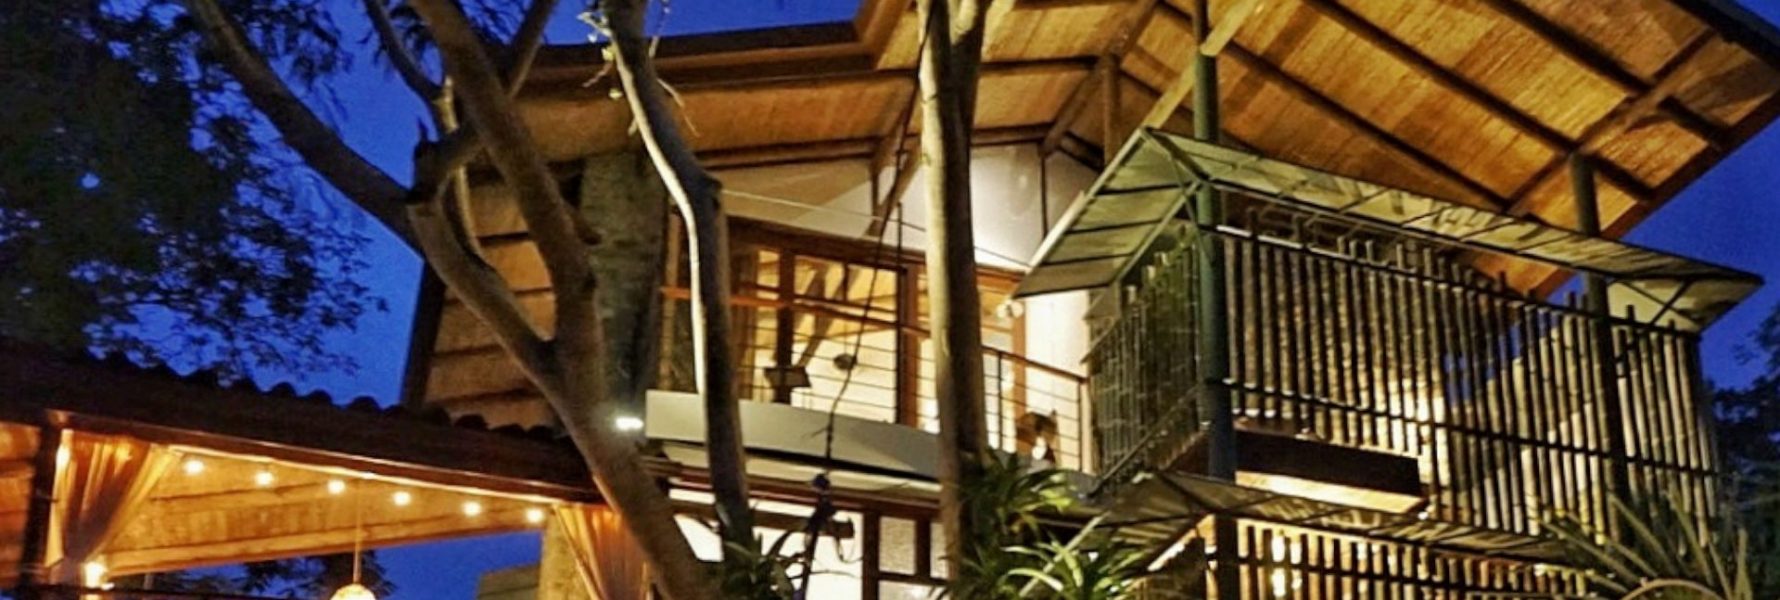 Enjoy the night time view of this stunning vacation rental.